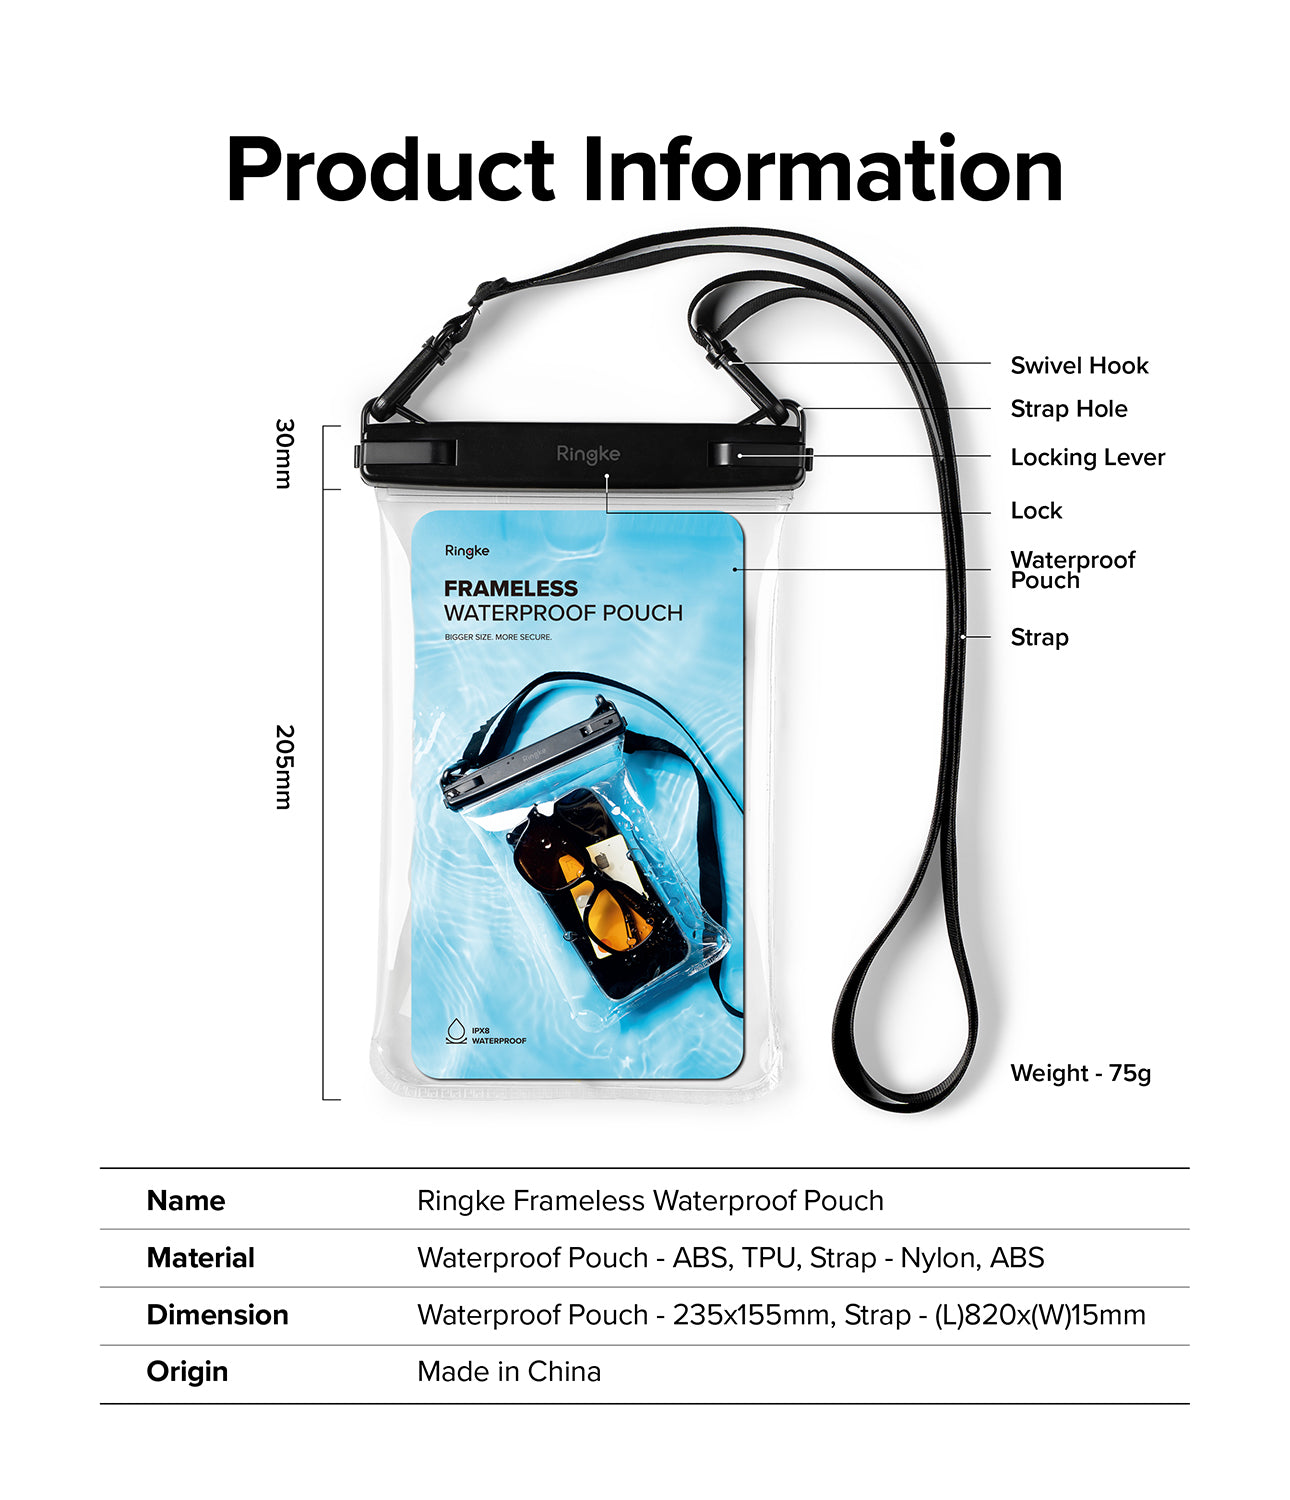 Ringke Waterproof Pouch Case | Frameless - One Touch Lock - tight seal to prevent water leakage - Large storage capacity